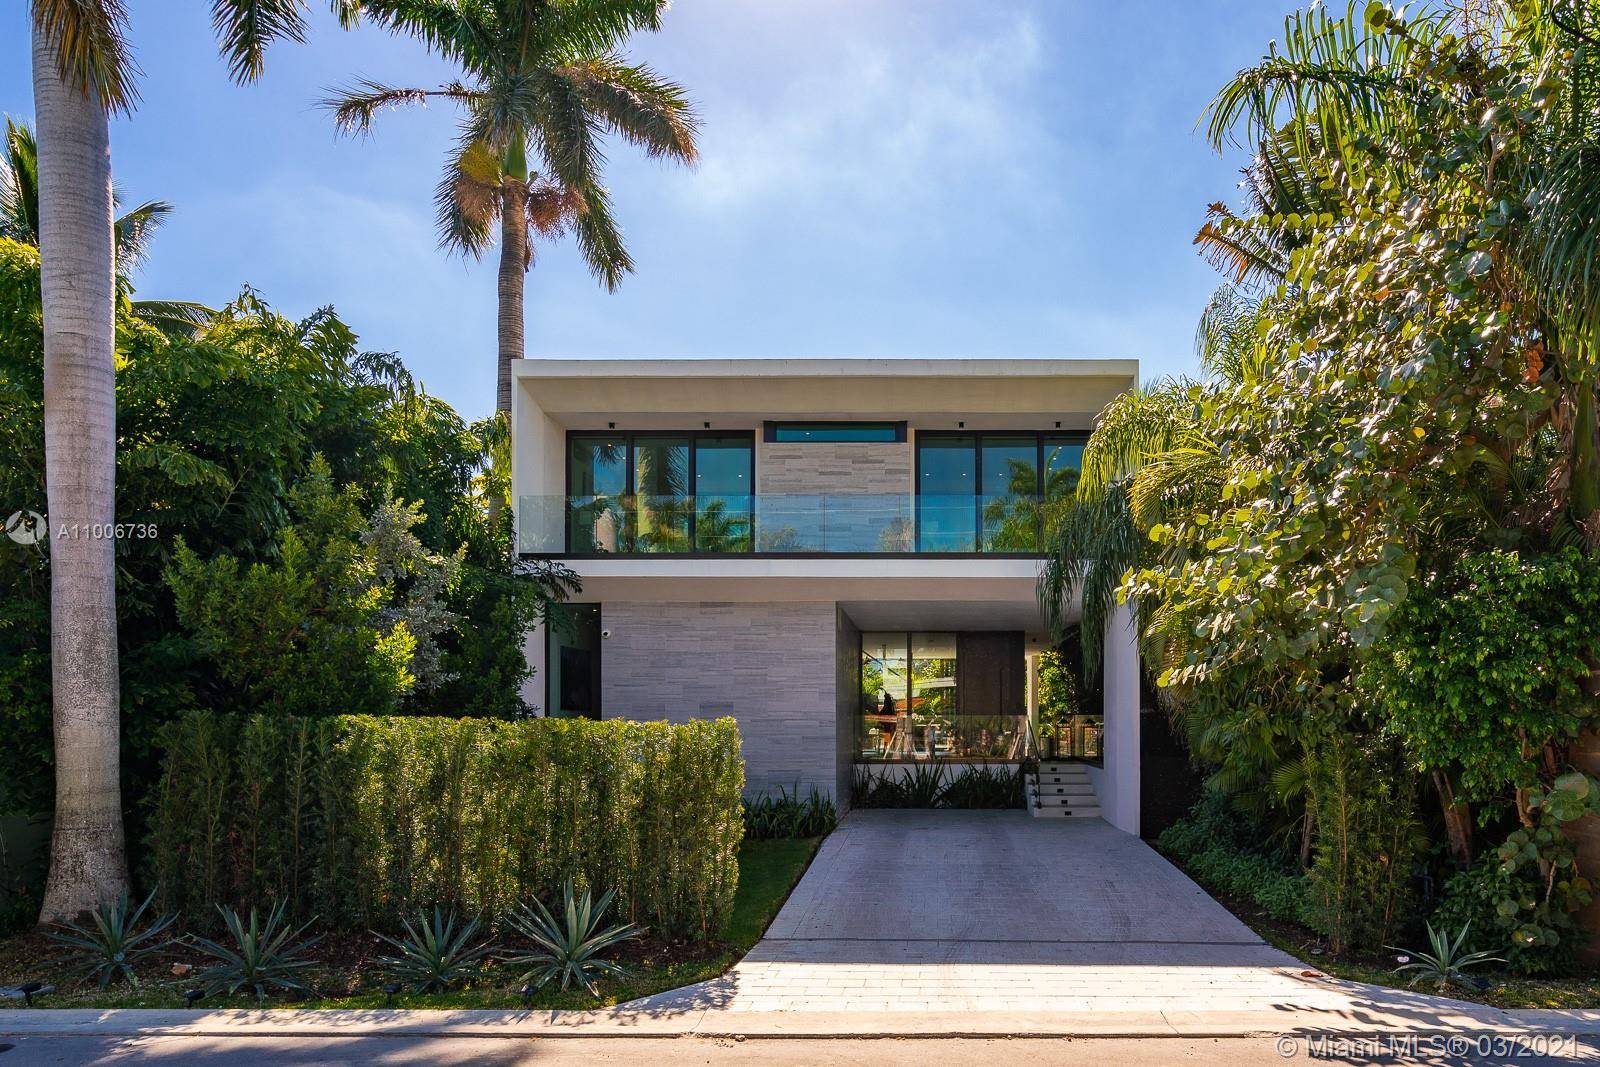 Contemporary home on Palm Island, boasting artistic pavers, unique landscape design, with mature trees, wood accents, Louver doors, Veneta Cucina cabinets, custom surround pre wired smart home.